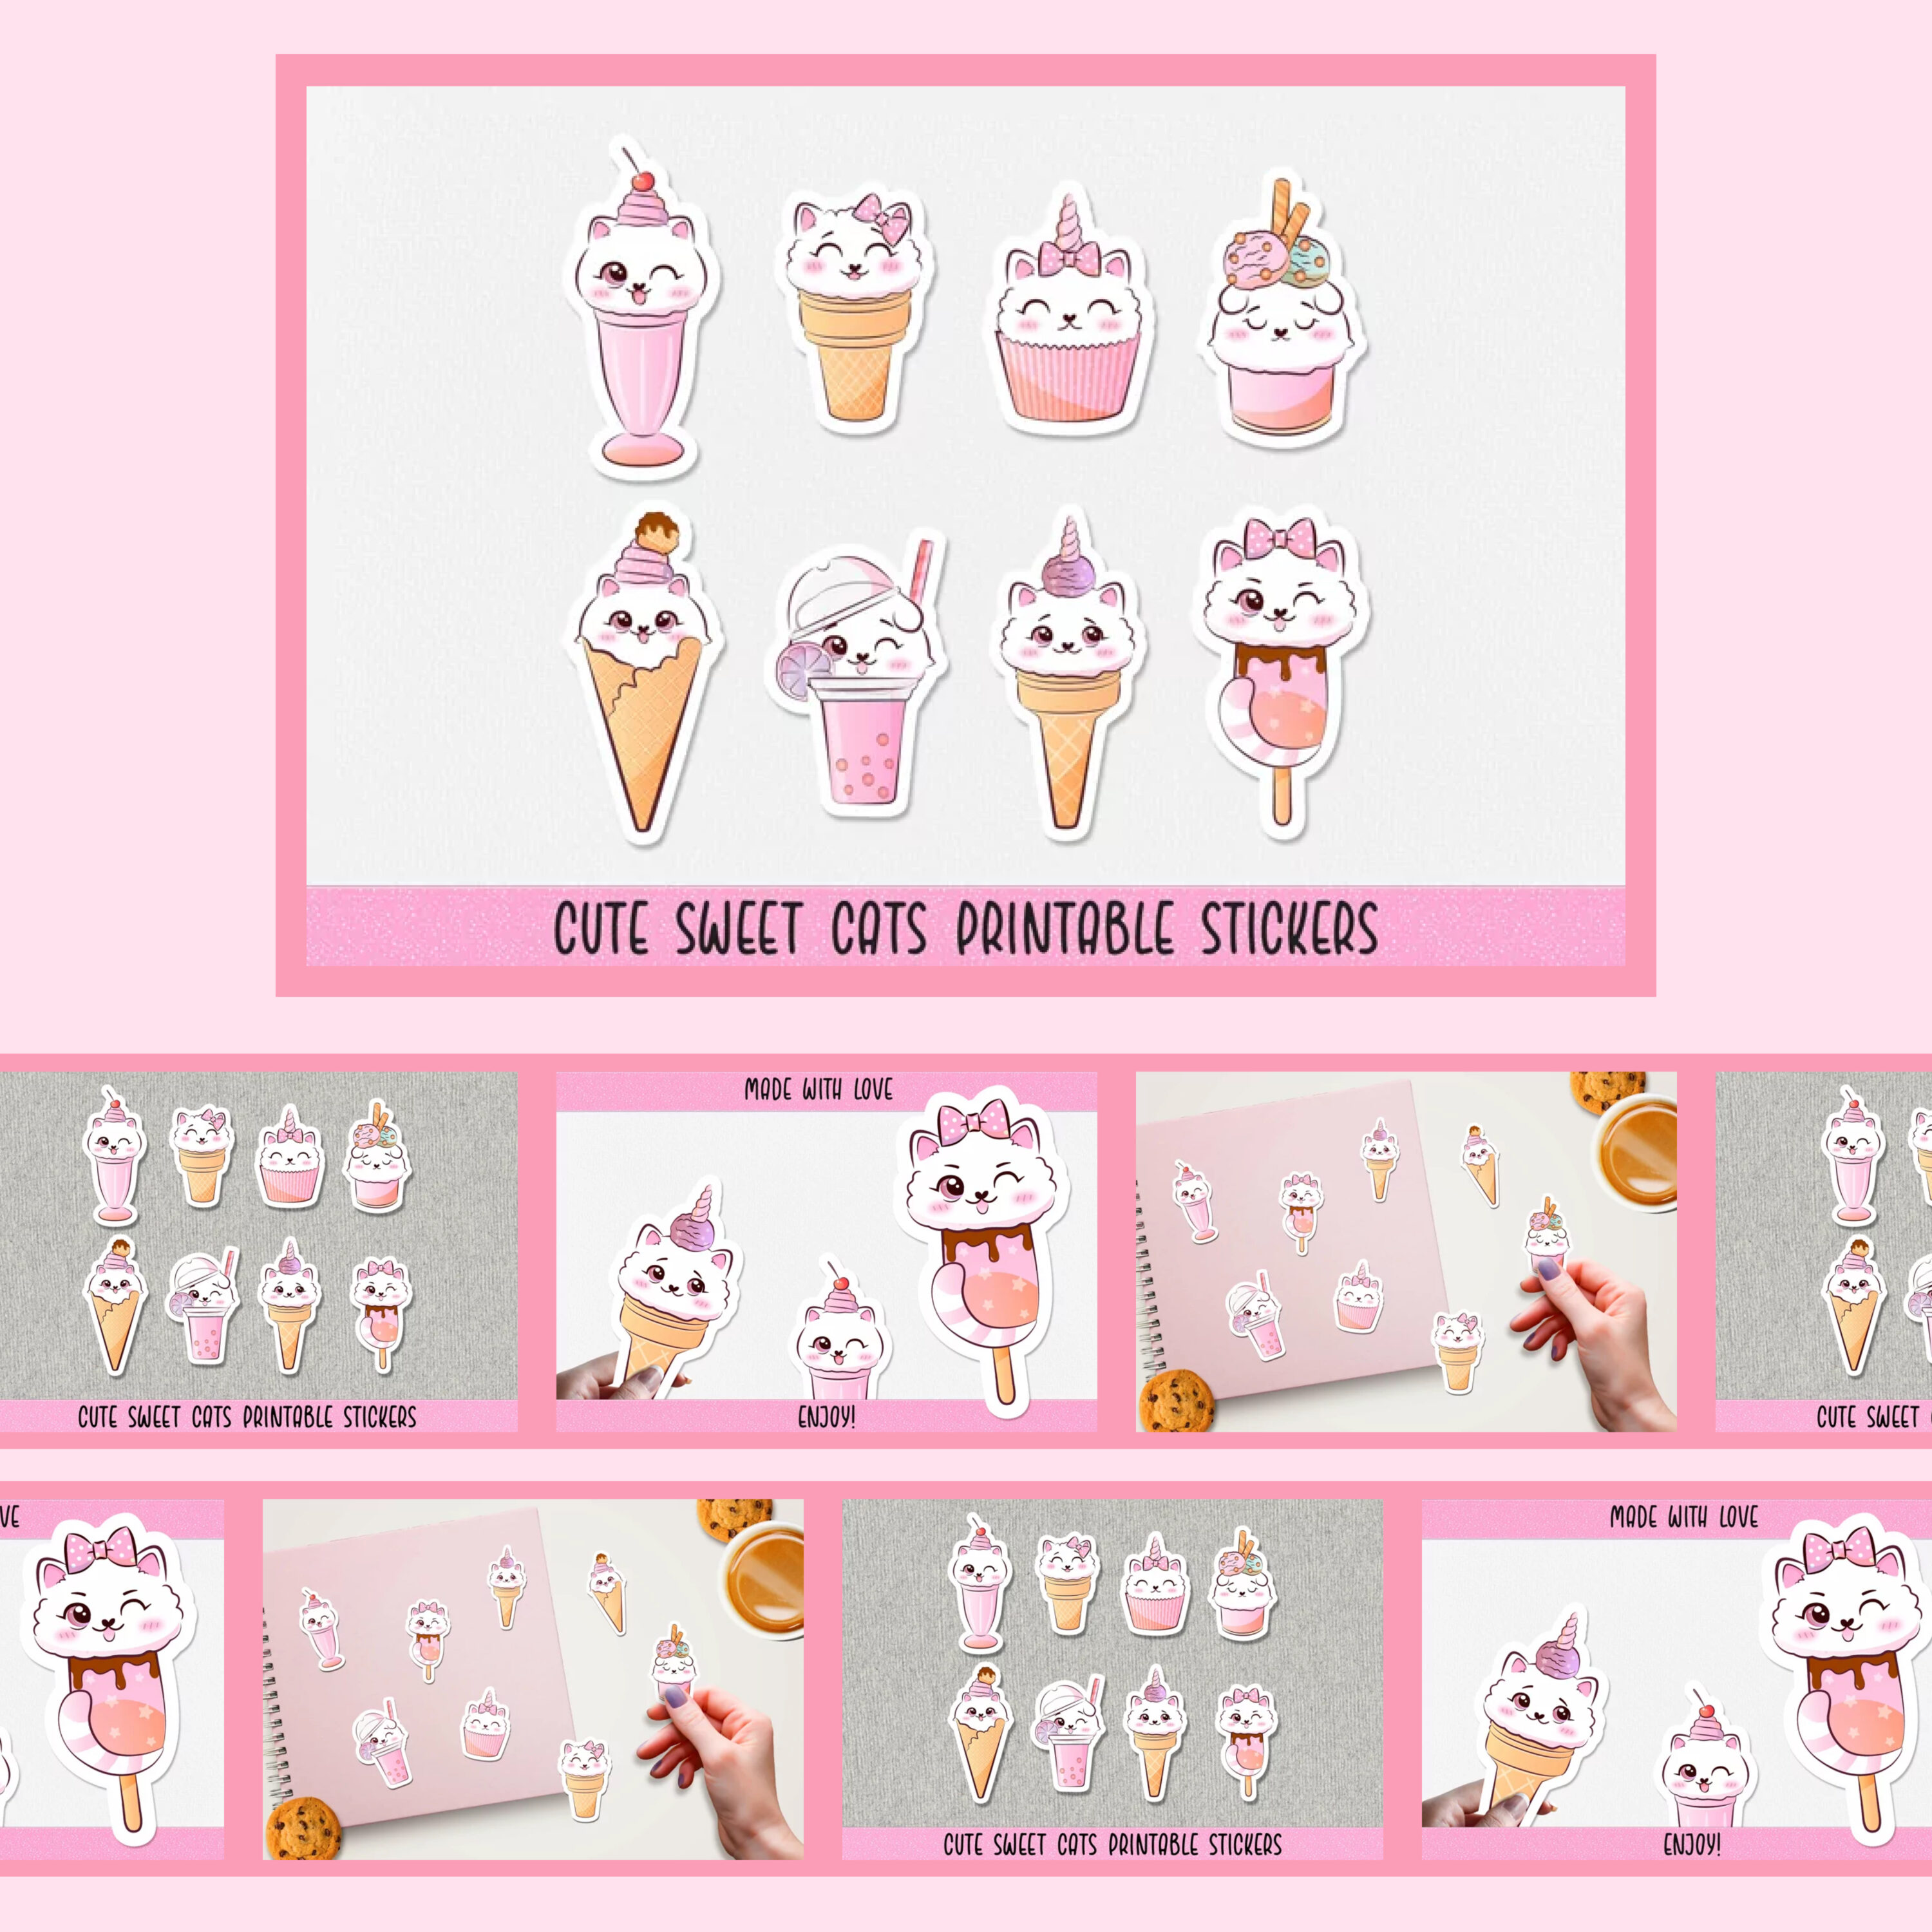 Cute sweet cats printable stickers preview.